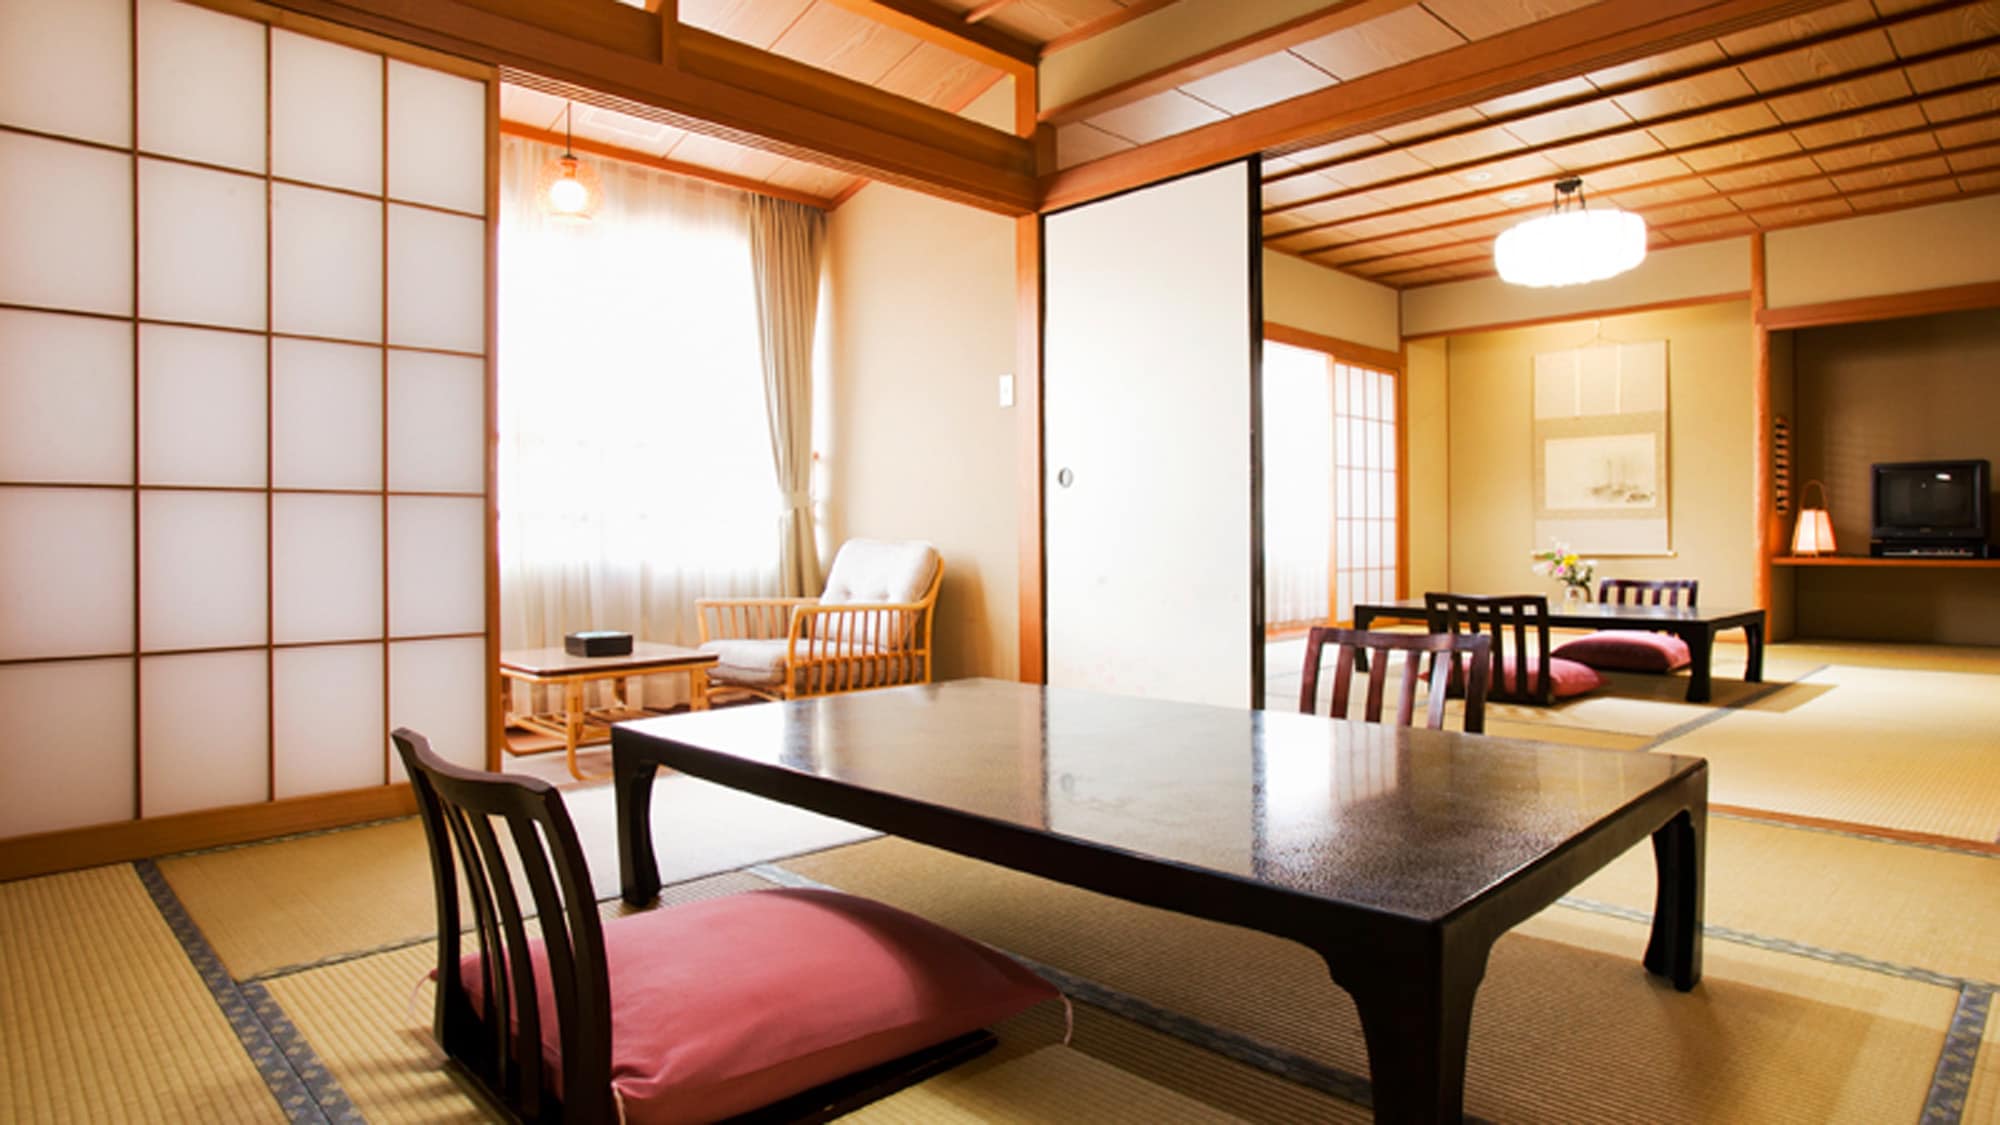 ■ Kachotei 2 rooms (Japanese-style room with bath and toilet 10 + 8 tatami mats)